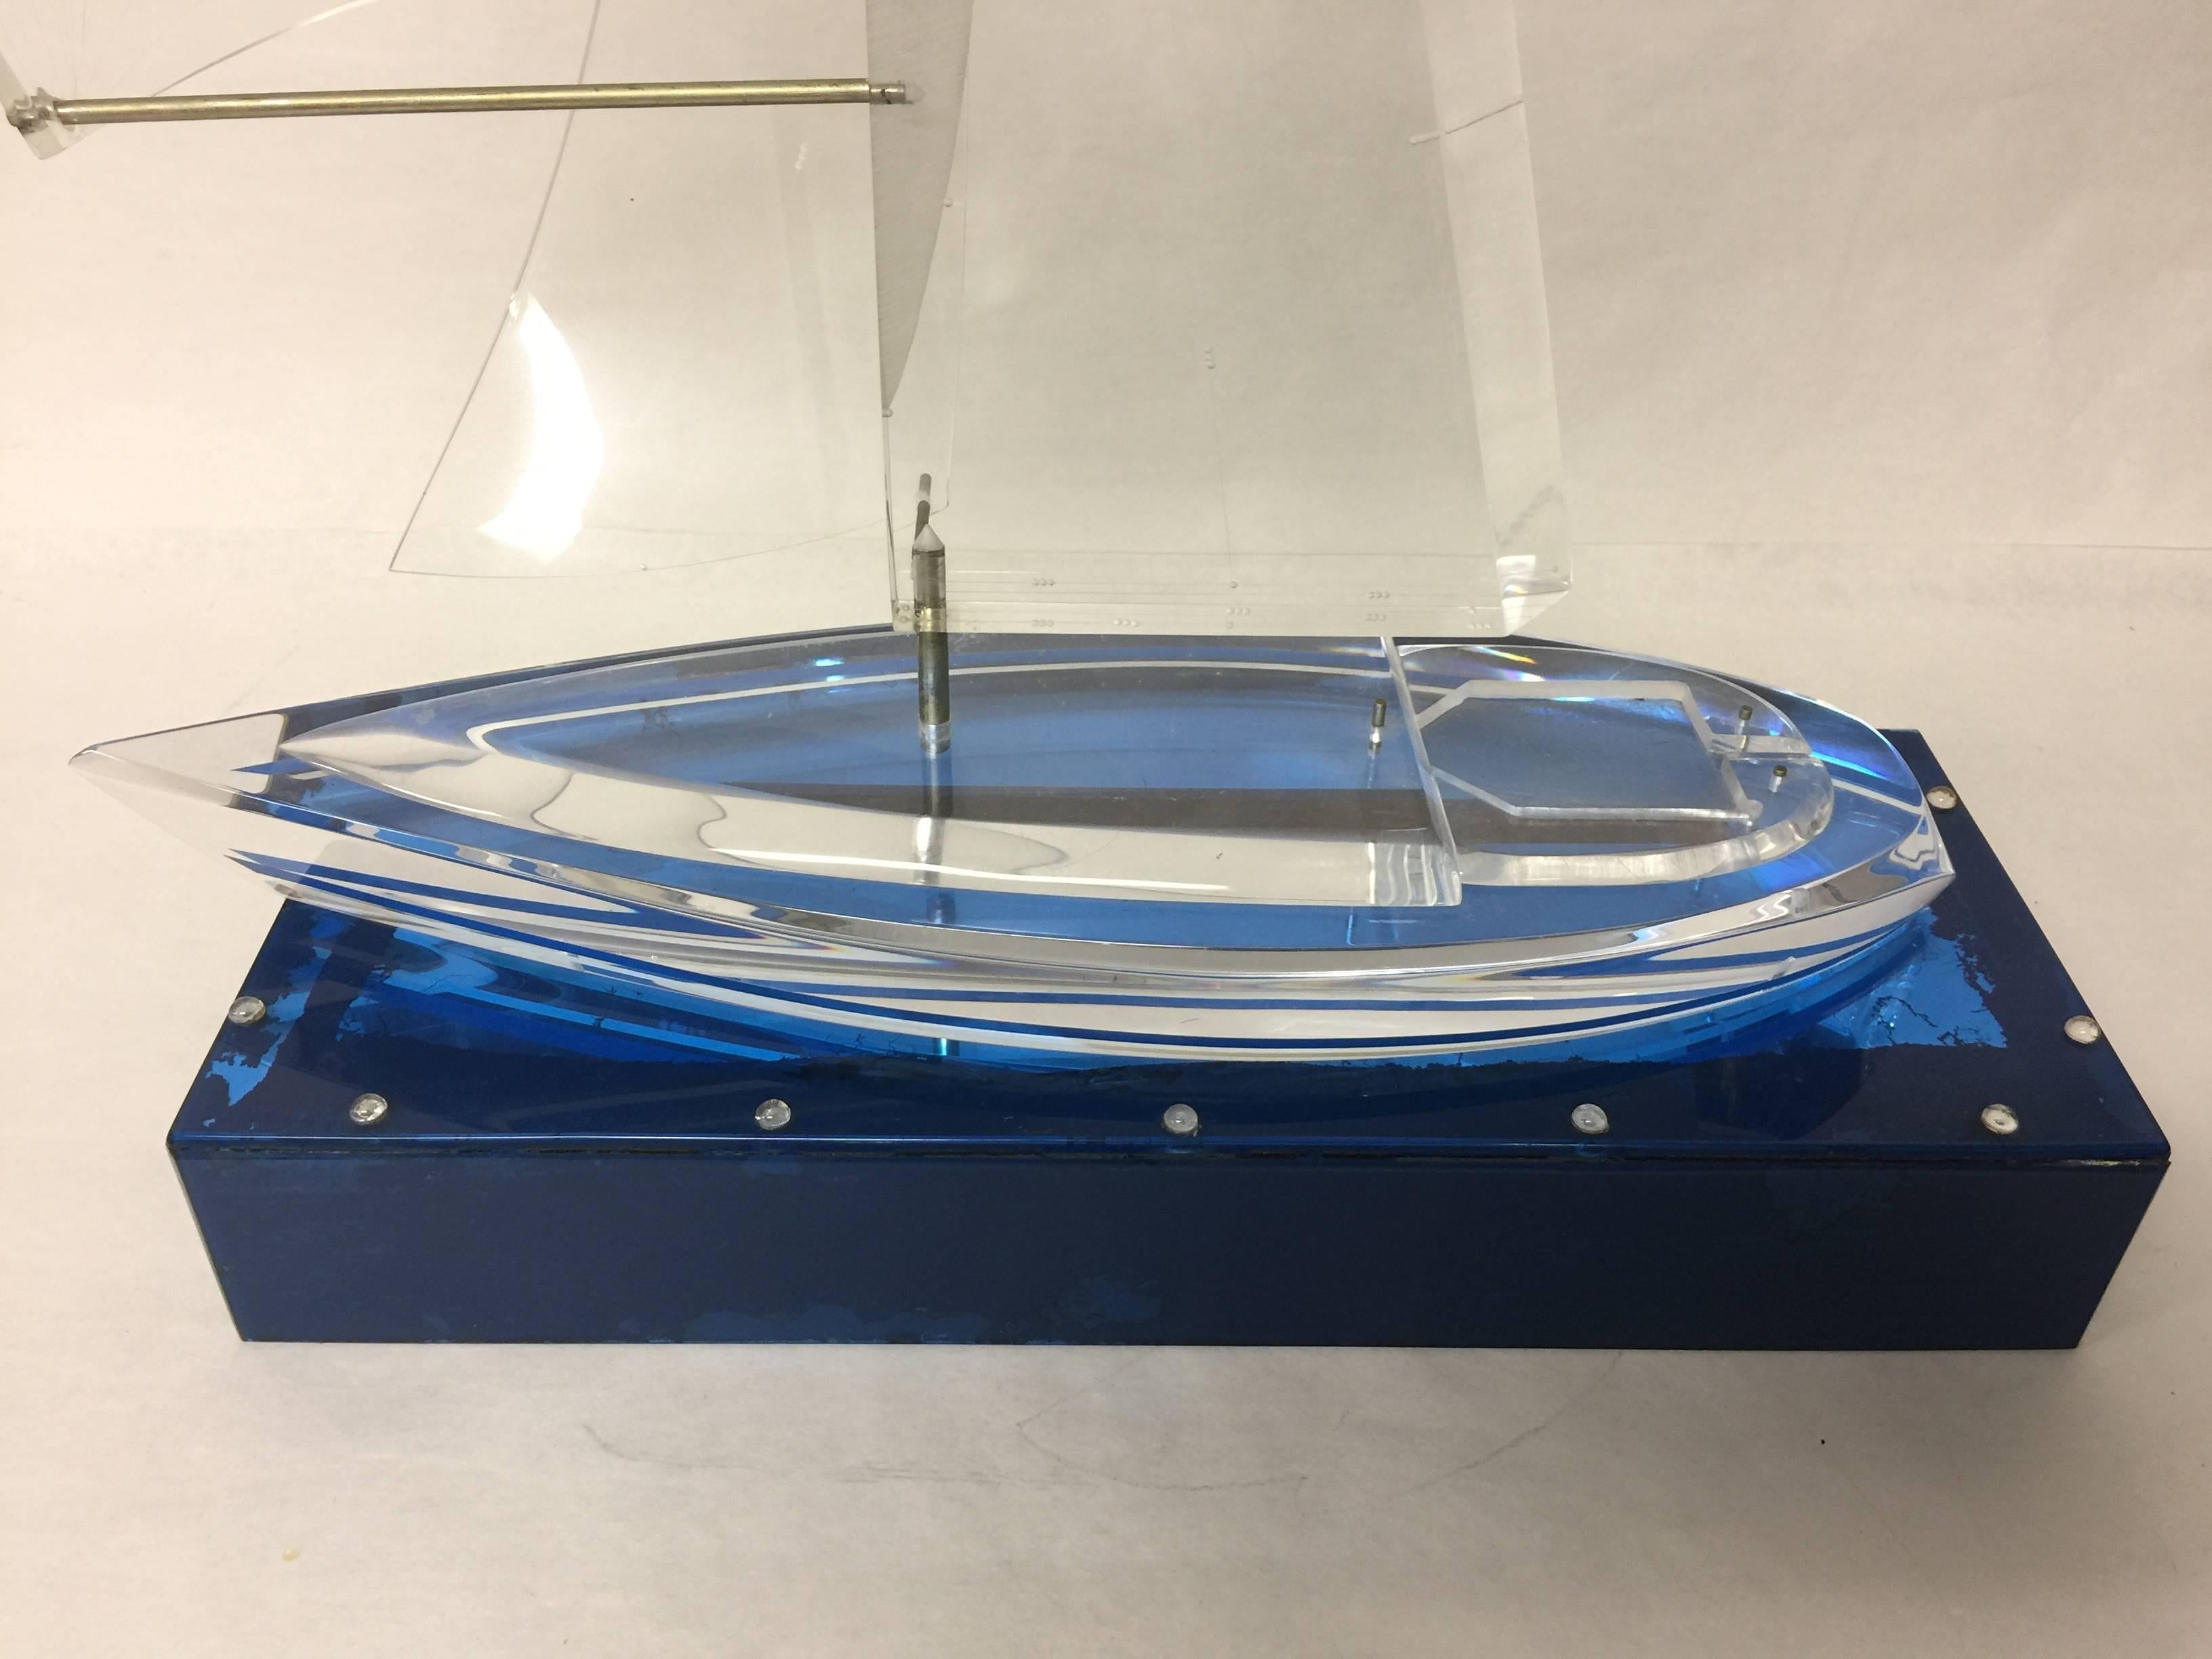 Ahoy matey, lower the boom, raise the sails. No, I'm not a sailor, but I can look like one with this vintage Lucite racing and sailing yacht model on a blue Lucite base. Oh, and it illuminates too. The base measures: 19.5